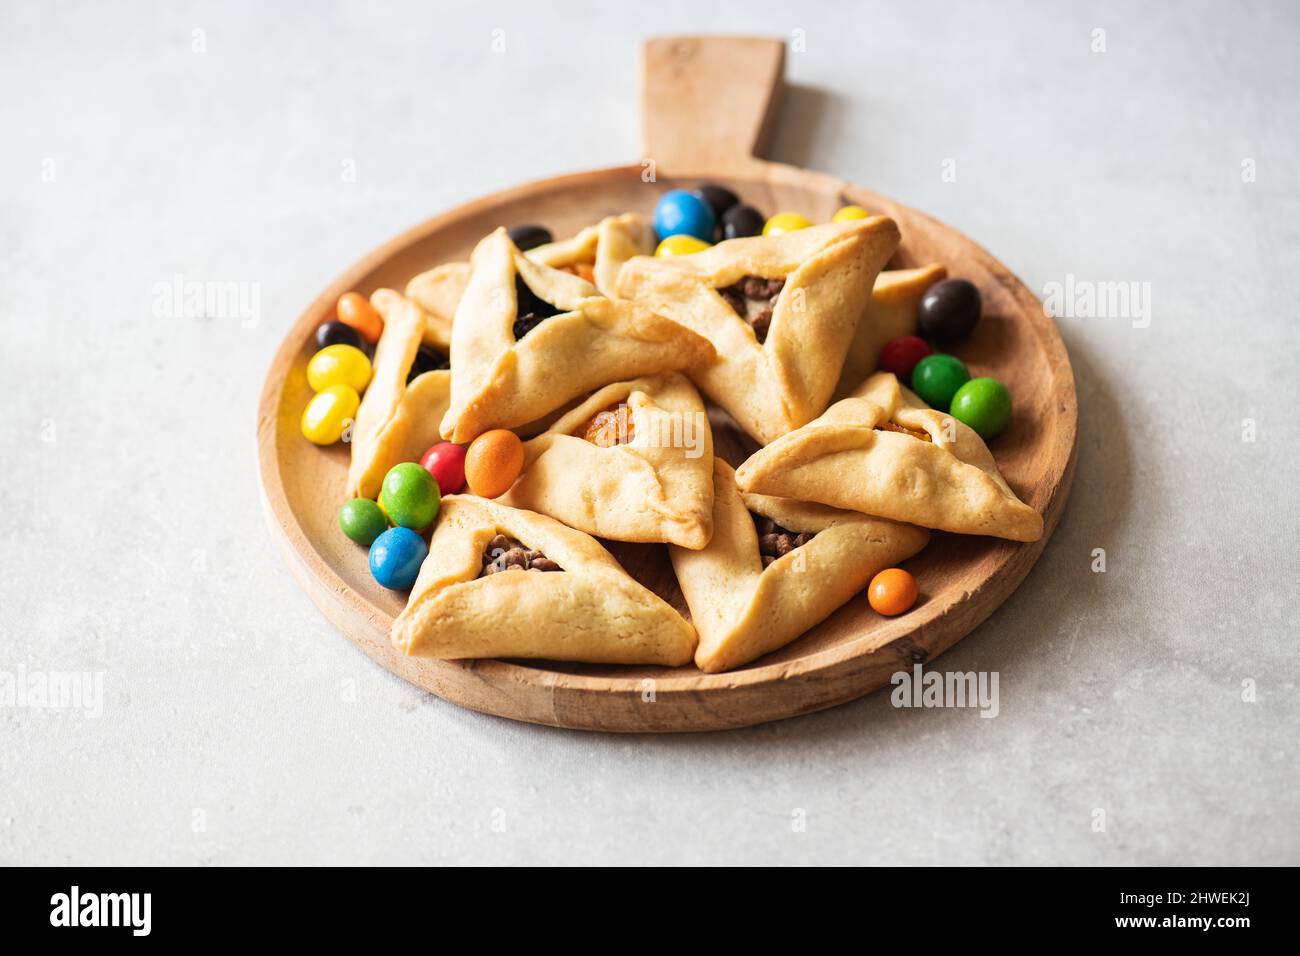 Assorted hamantaschen cookies and colorful candies on a wooden board on a gray background. Copy space. Stock Photo